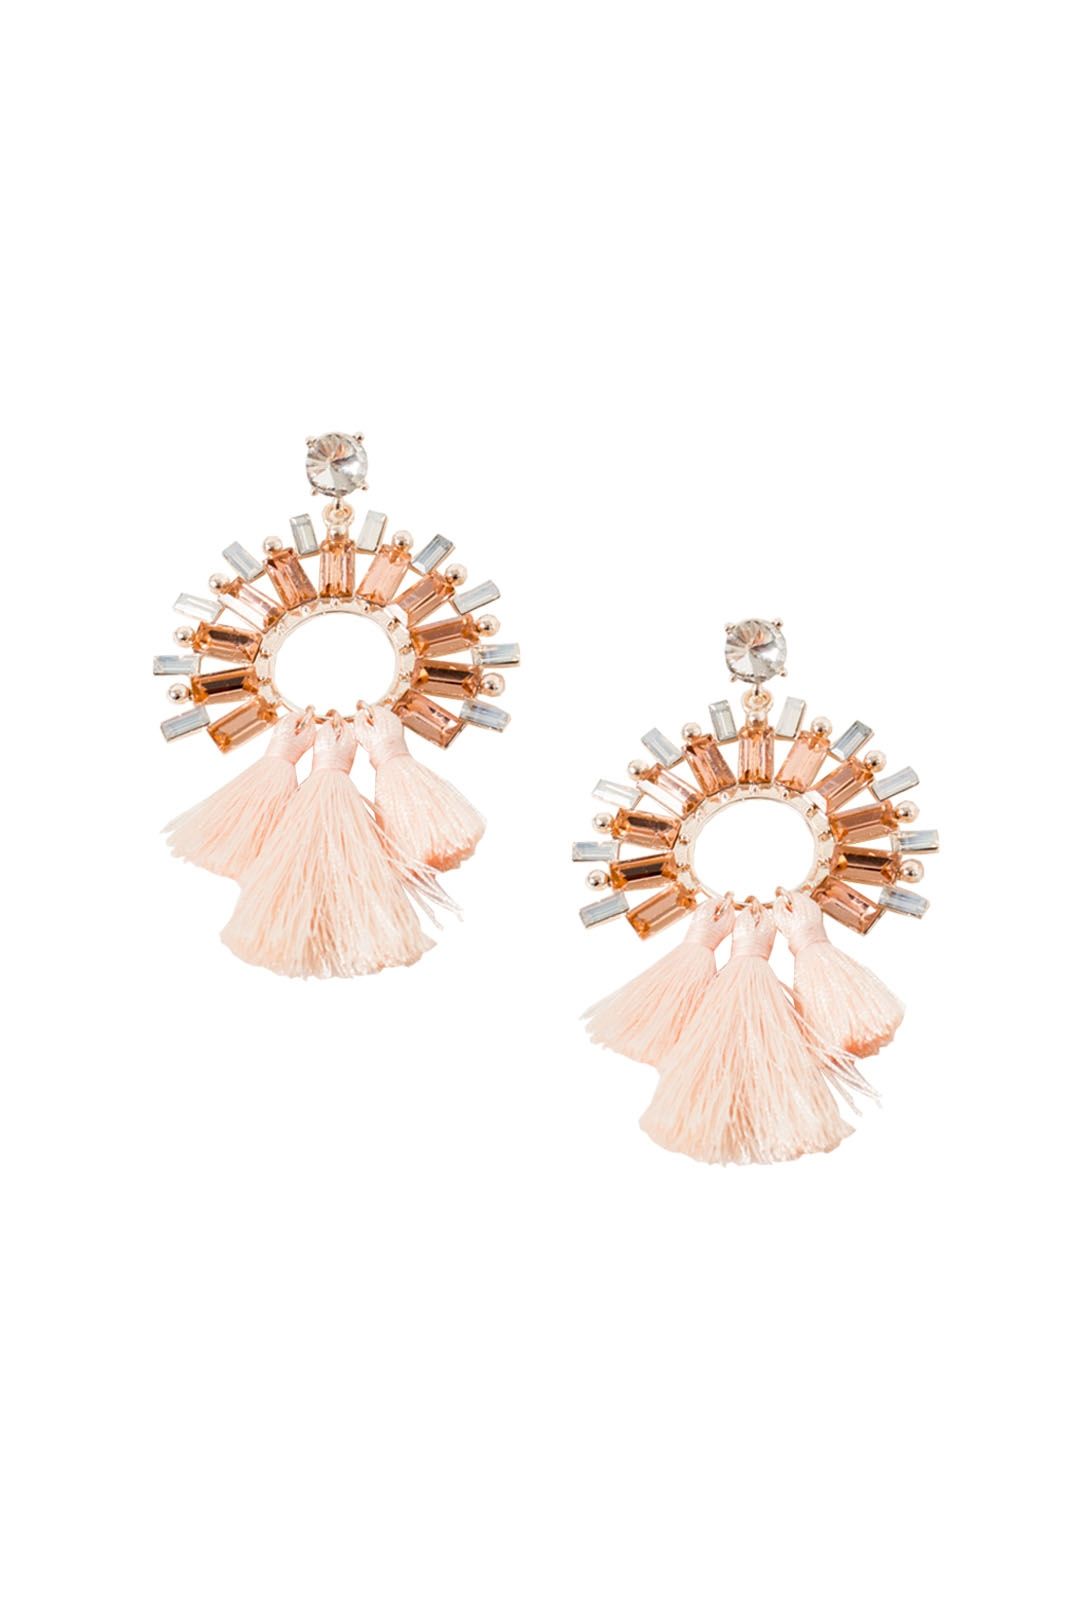 Adorne - Faced Glass Circle and Three Tassel Earrings - Rose Opal - Front